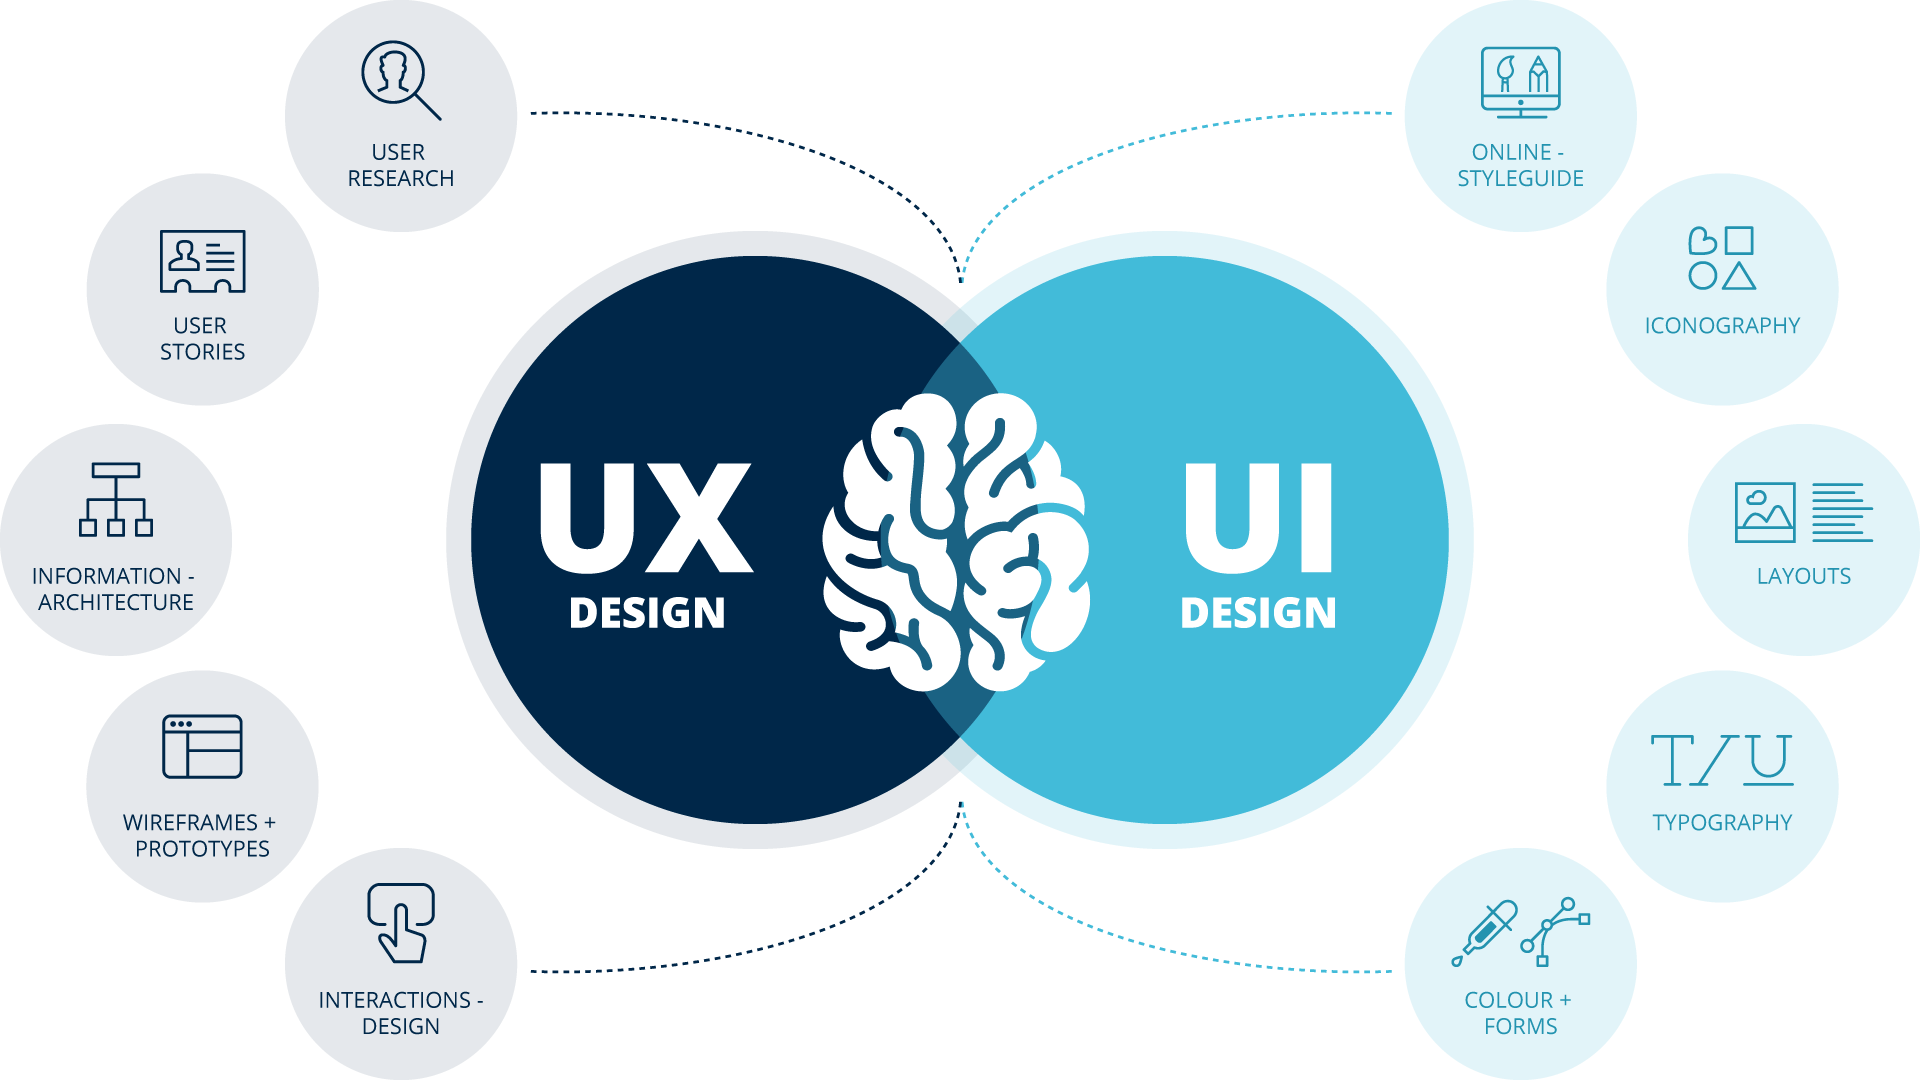 A diagram showing the difference between ux and ui design.